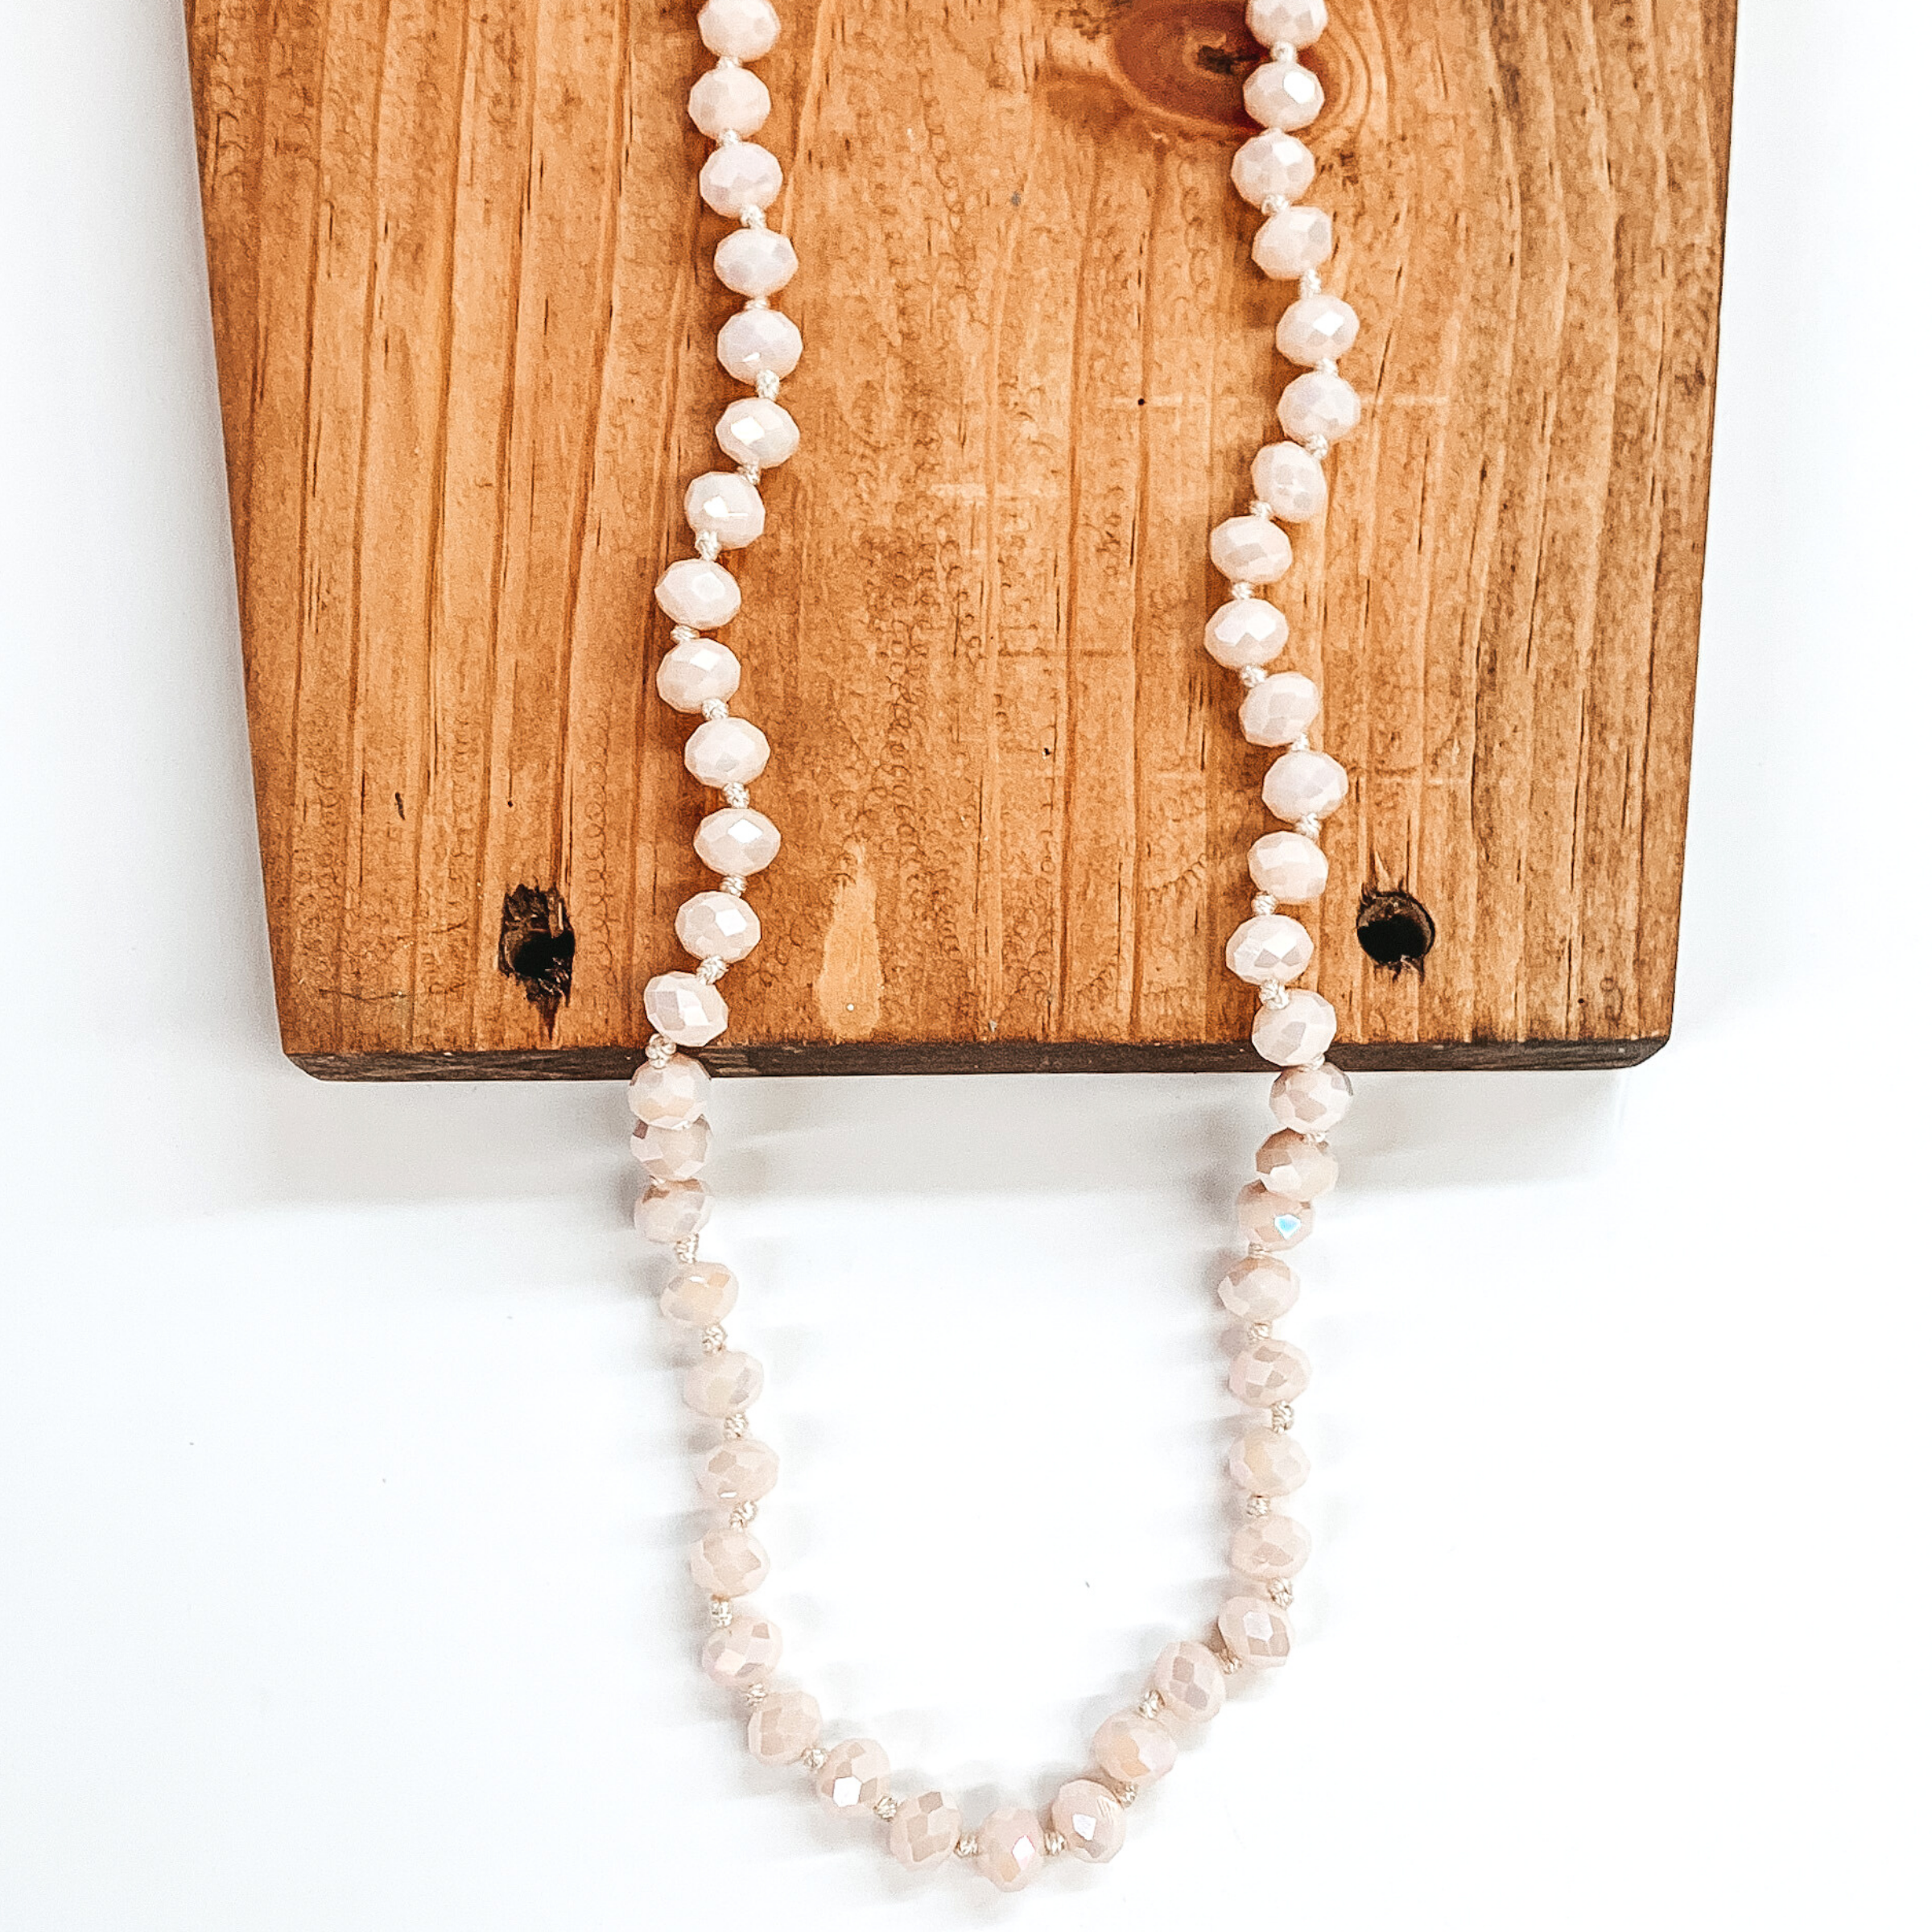 Pale pink crystal beaded necklace. This necklace is pictured partially laying on a brown block on a white background. 